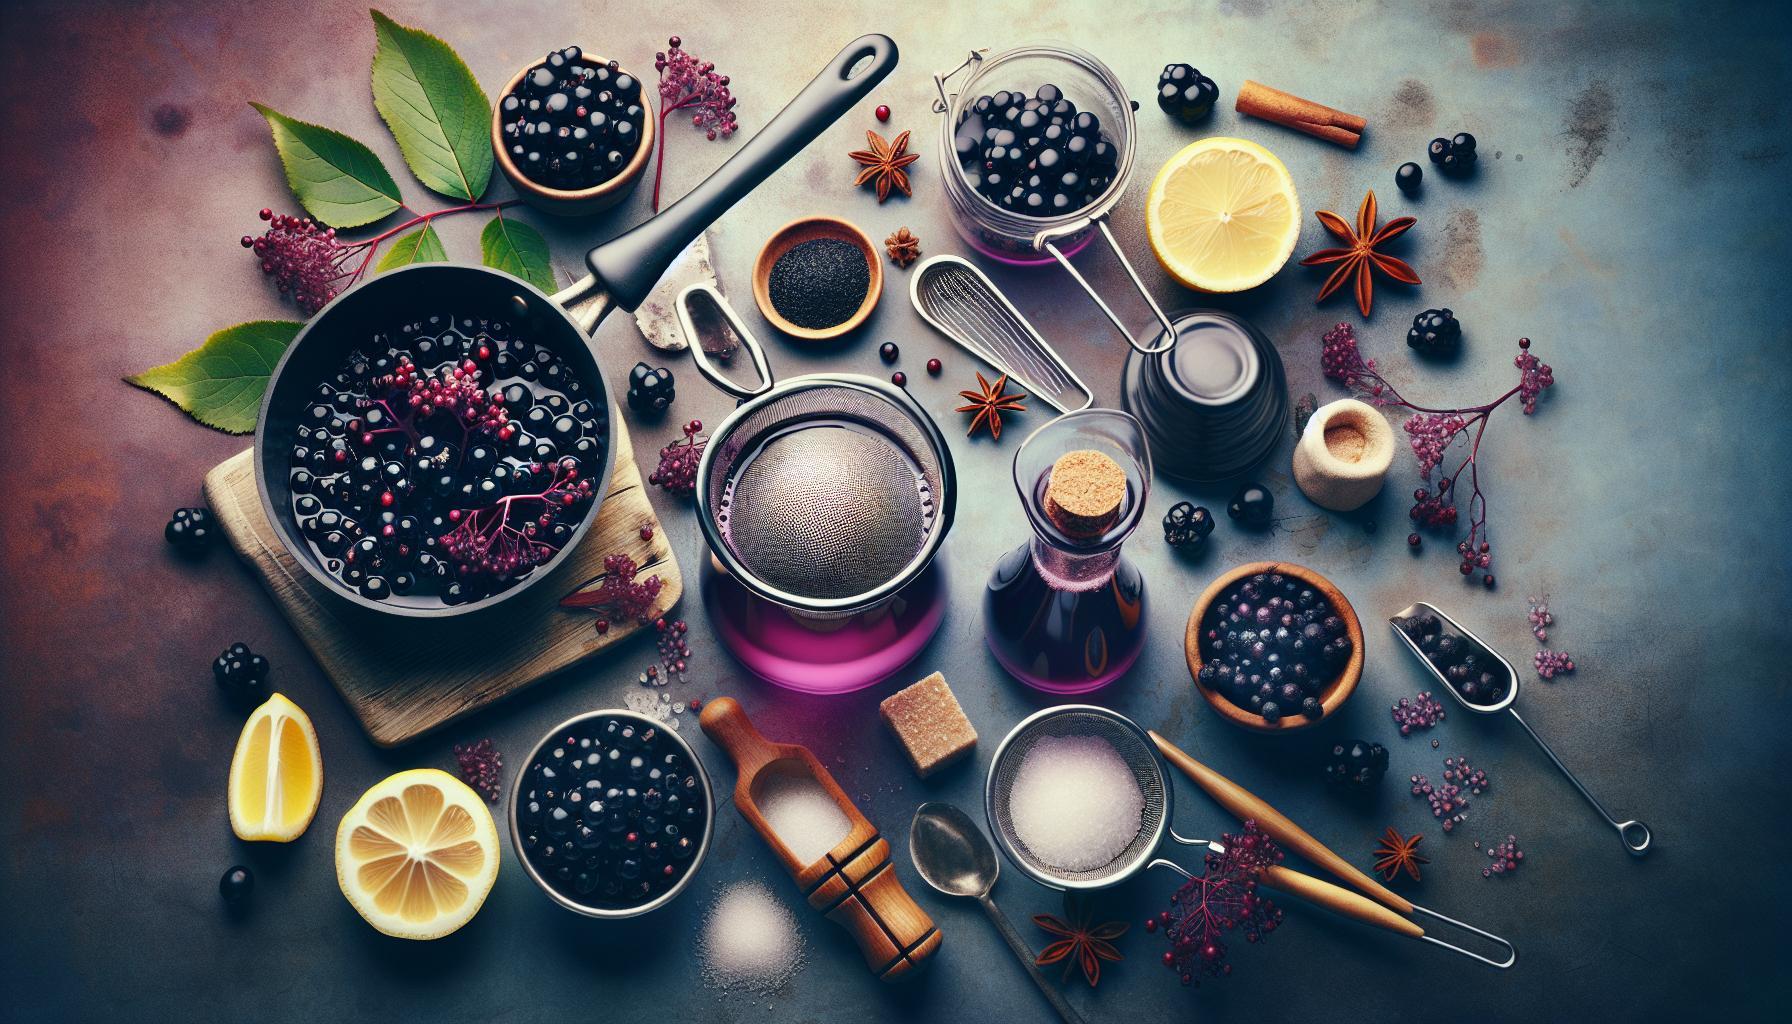 Boost Your Immunity with this Easy and Delicious Homemade Elderberry Juice Recipe